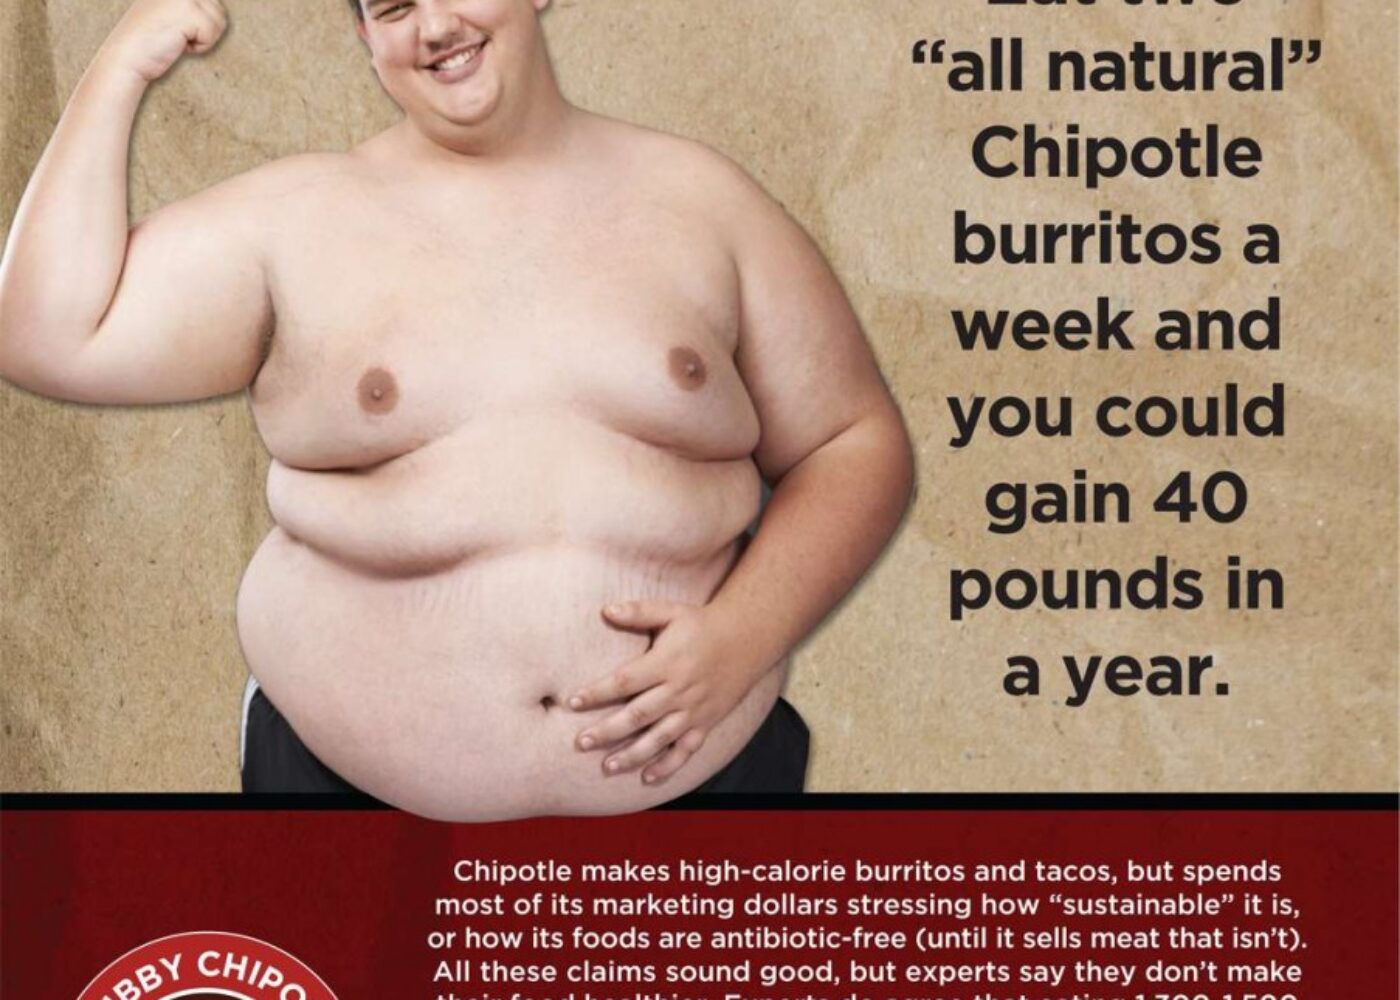 Chubby_Chipotle_Ad